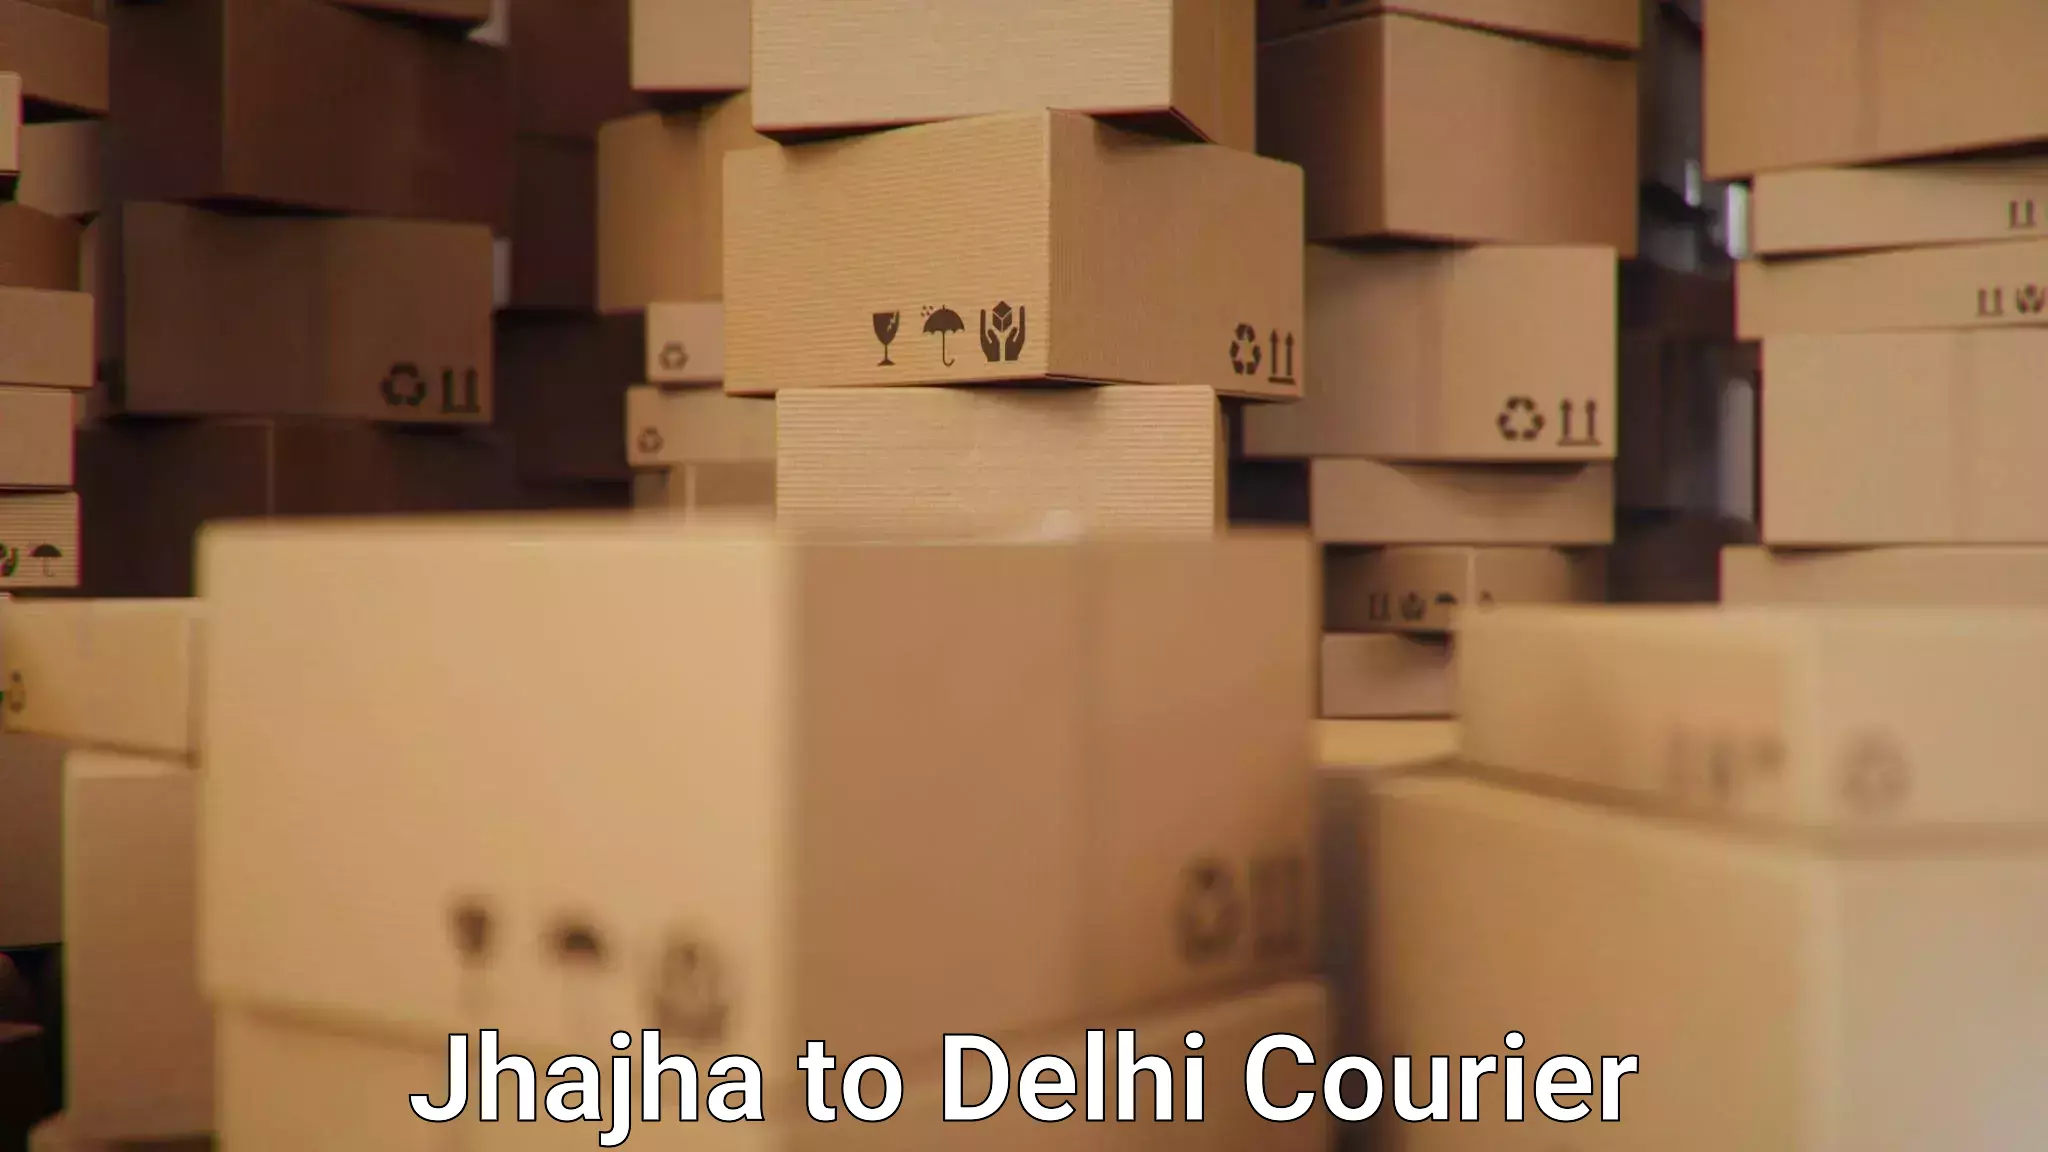 Secure shipping methods Jhajha to NCR